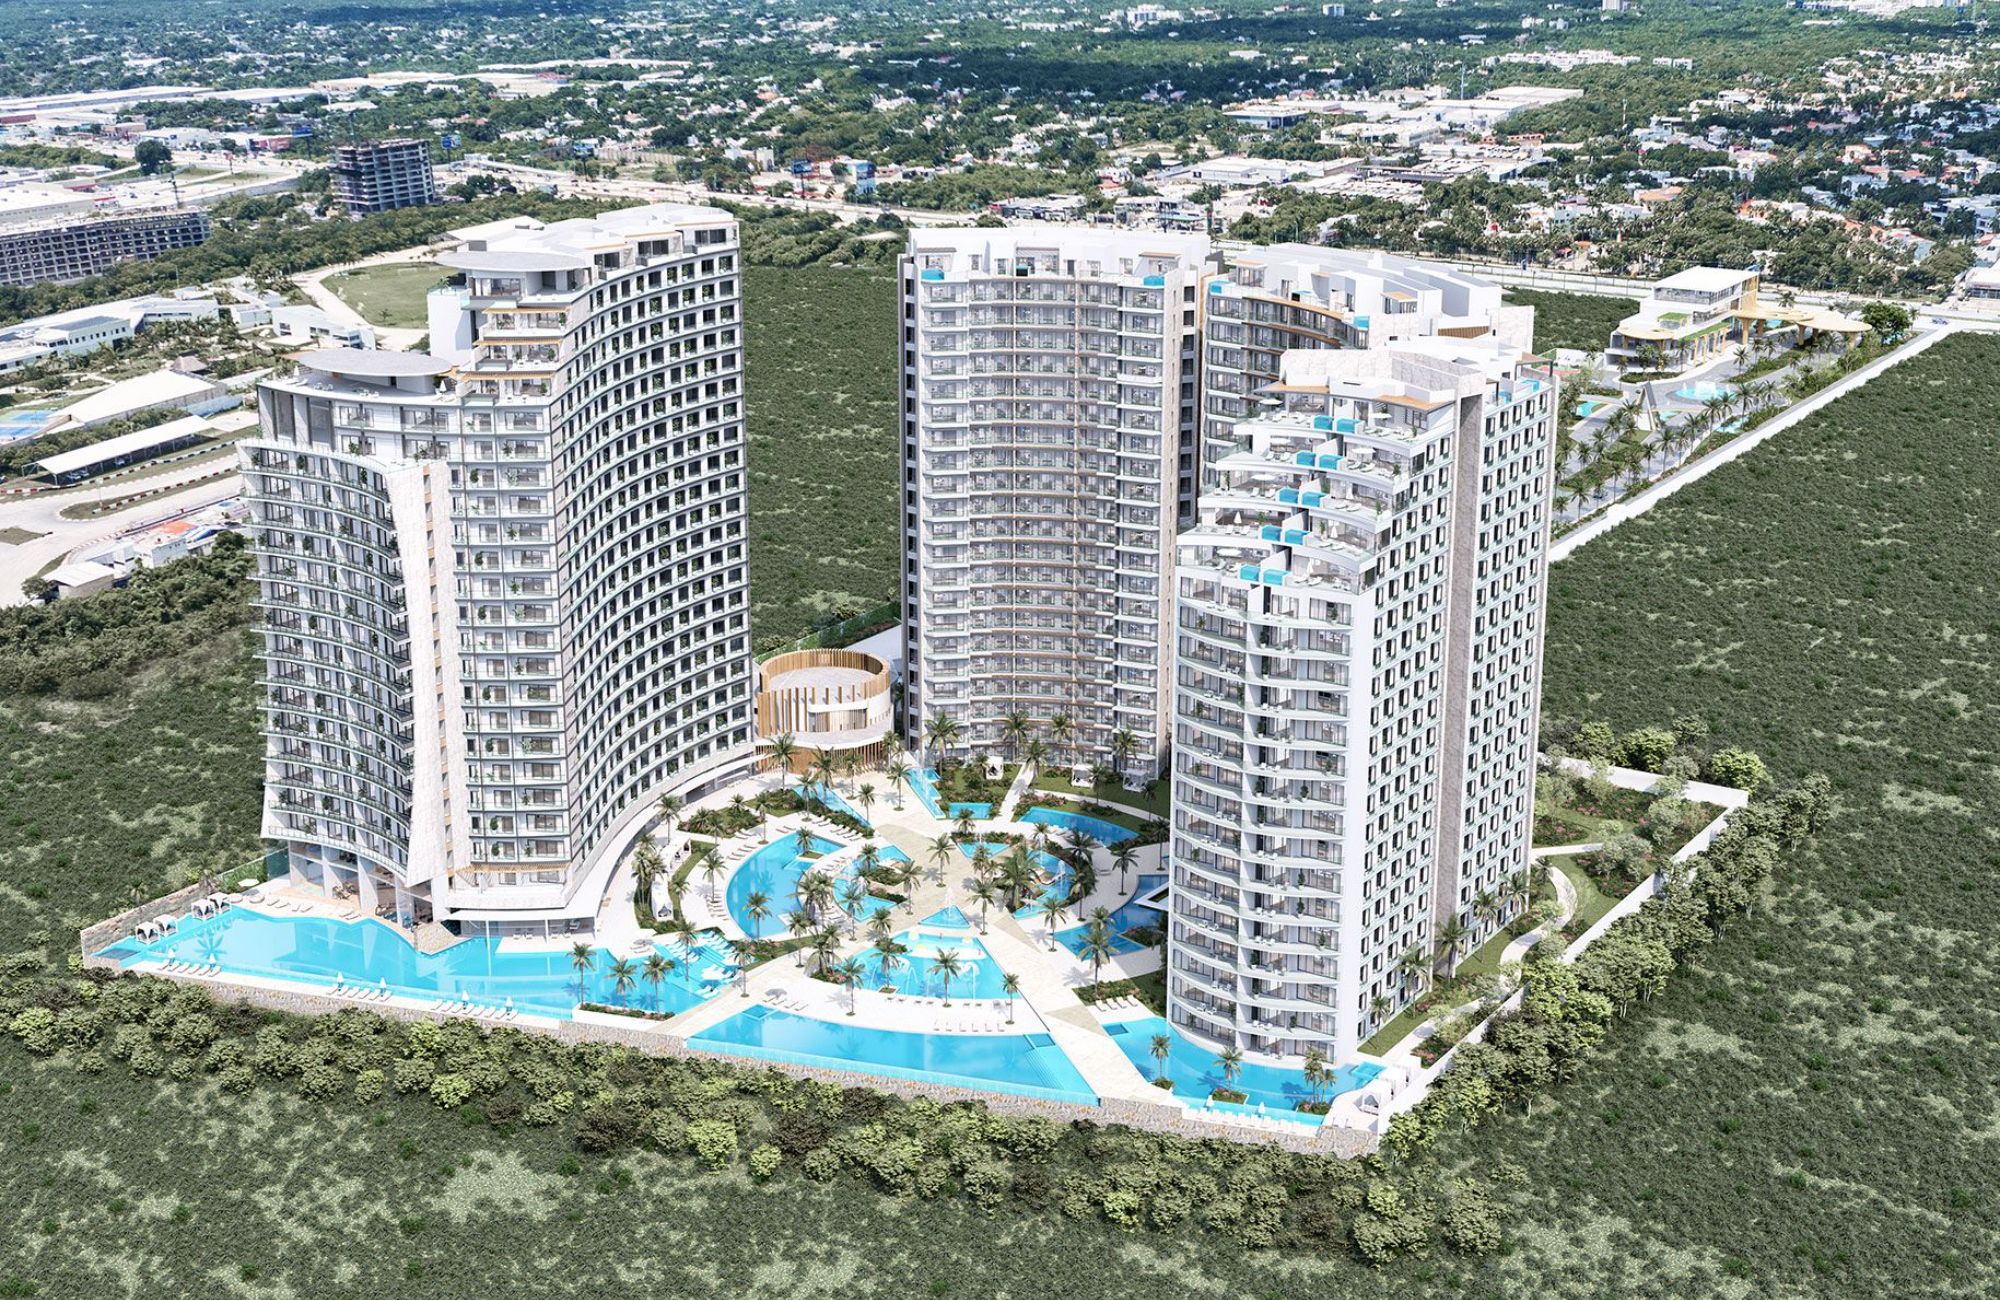 Condo with more than 25 amenities, spa, cinema, gamer room, sports fields, dog park, climbing wall, and more pre-construction Cancun.